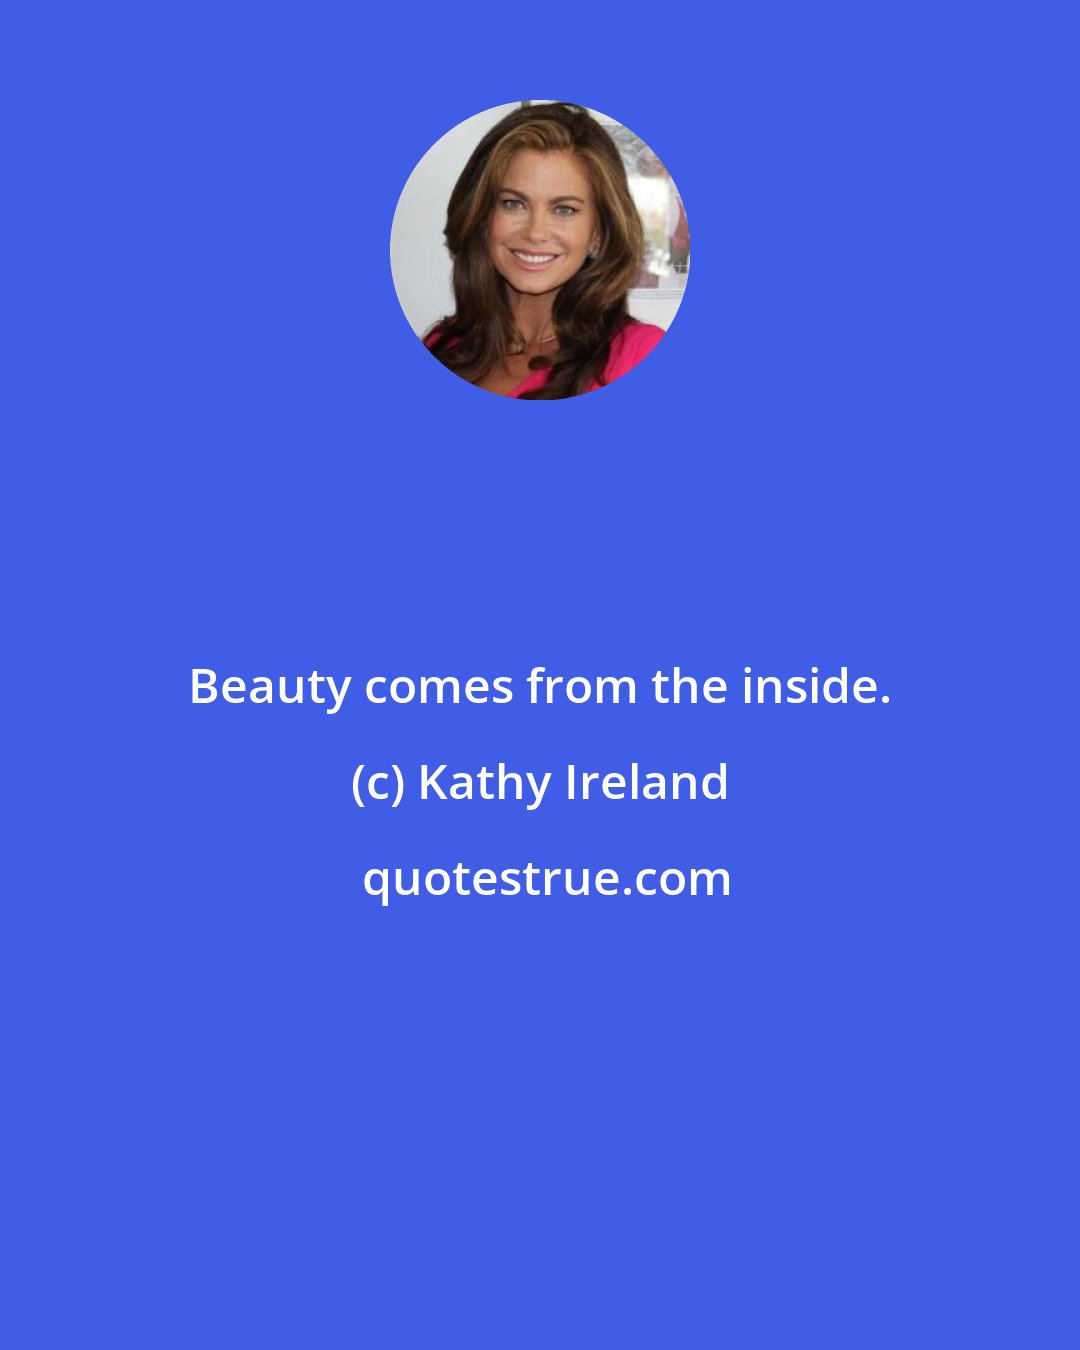 Kathy Ireland: Beauty comes from the inside.